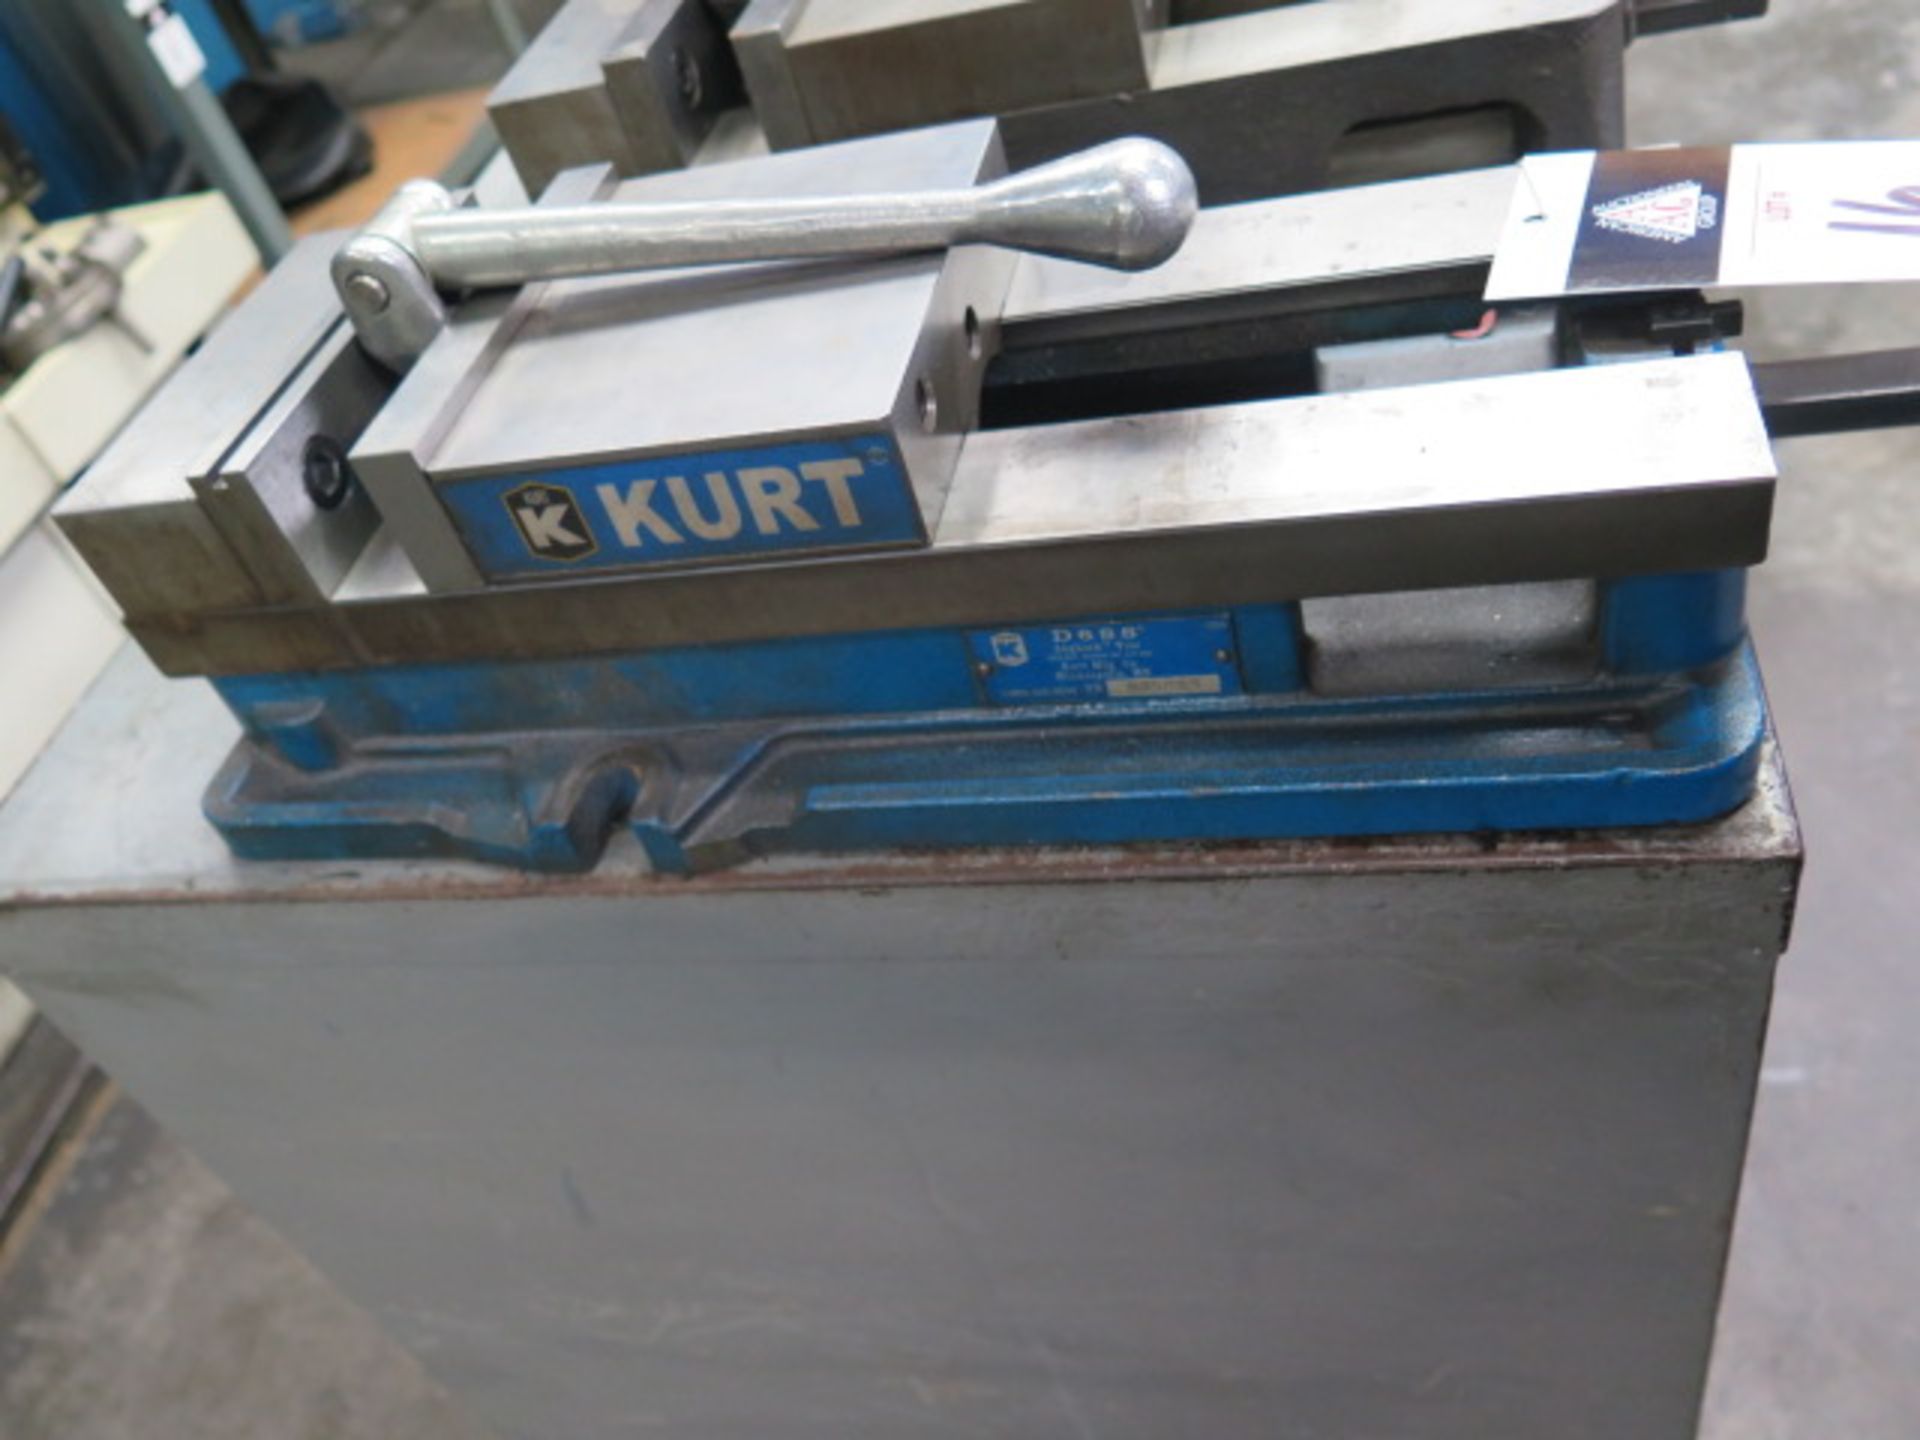 Kurt D688 6" Angle-Lock Vise (SOLD AS-IS - NO WARRANTY) - Image 2 of 5